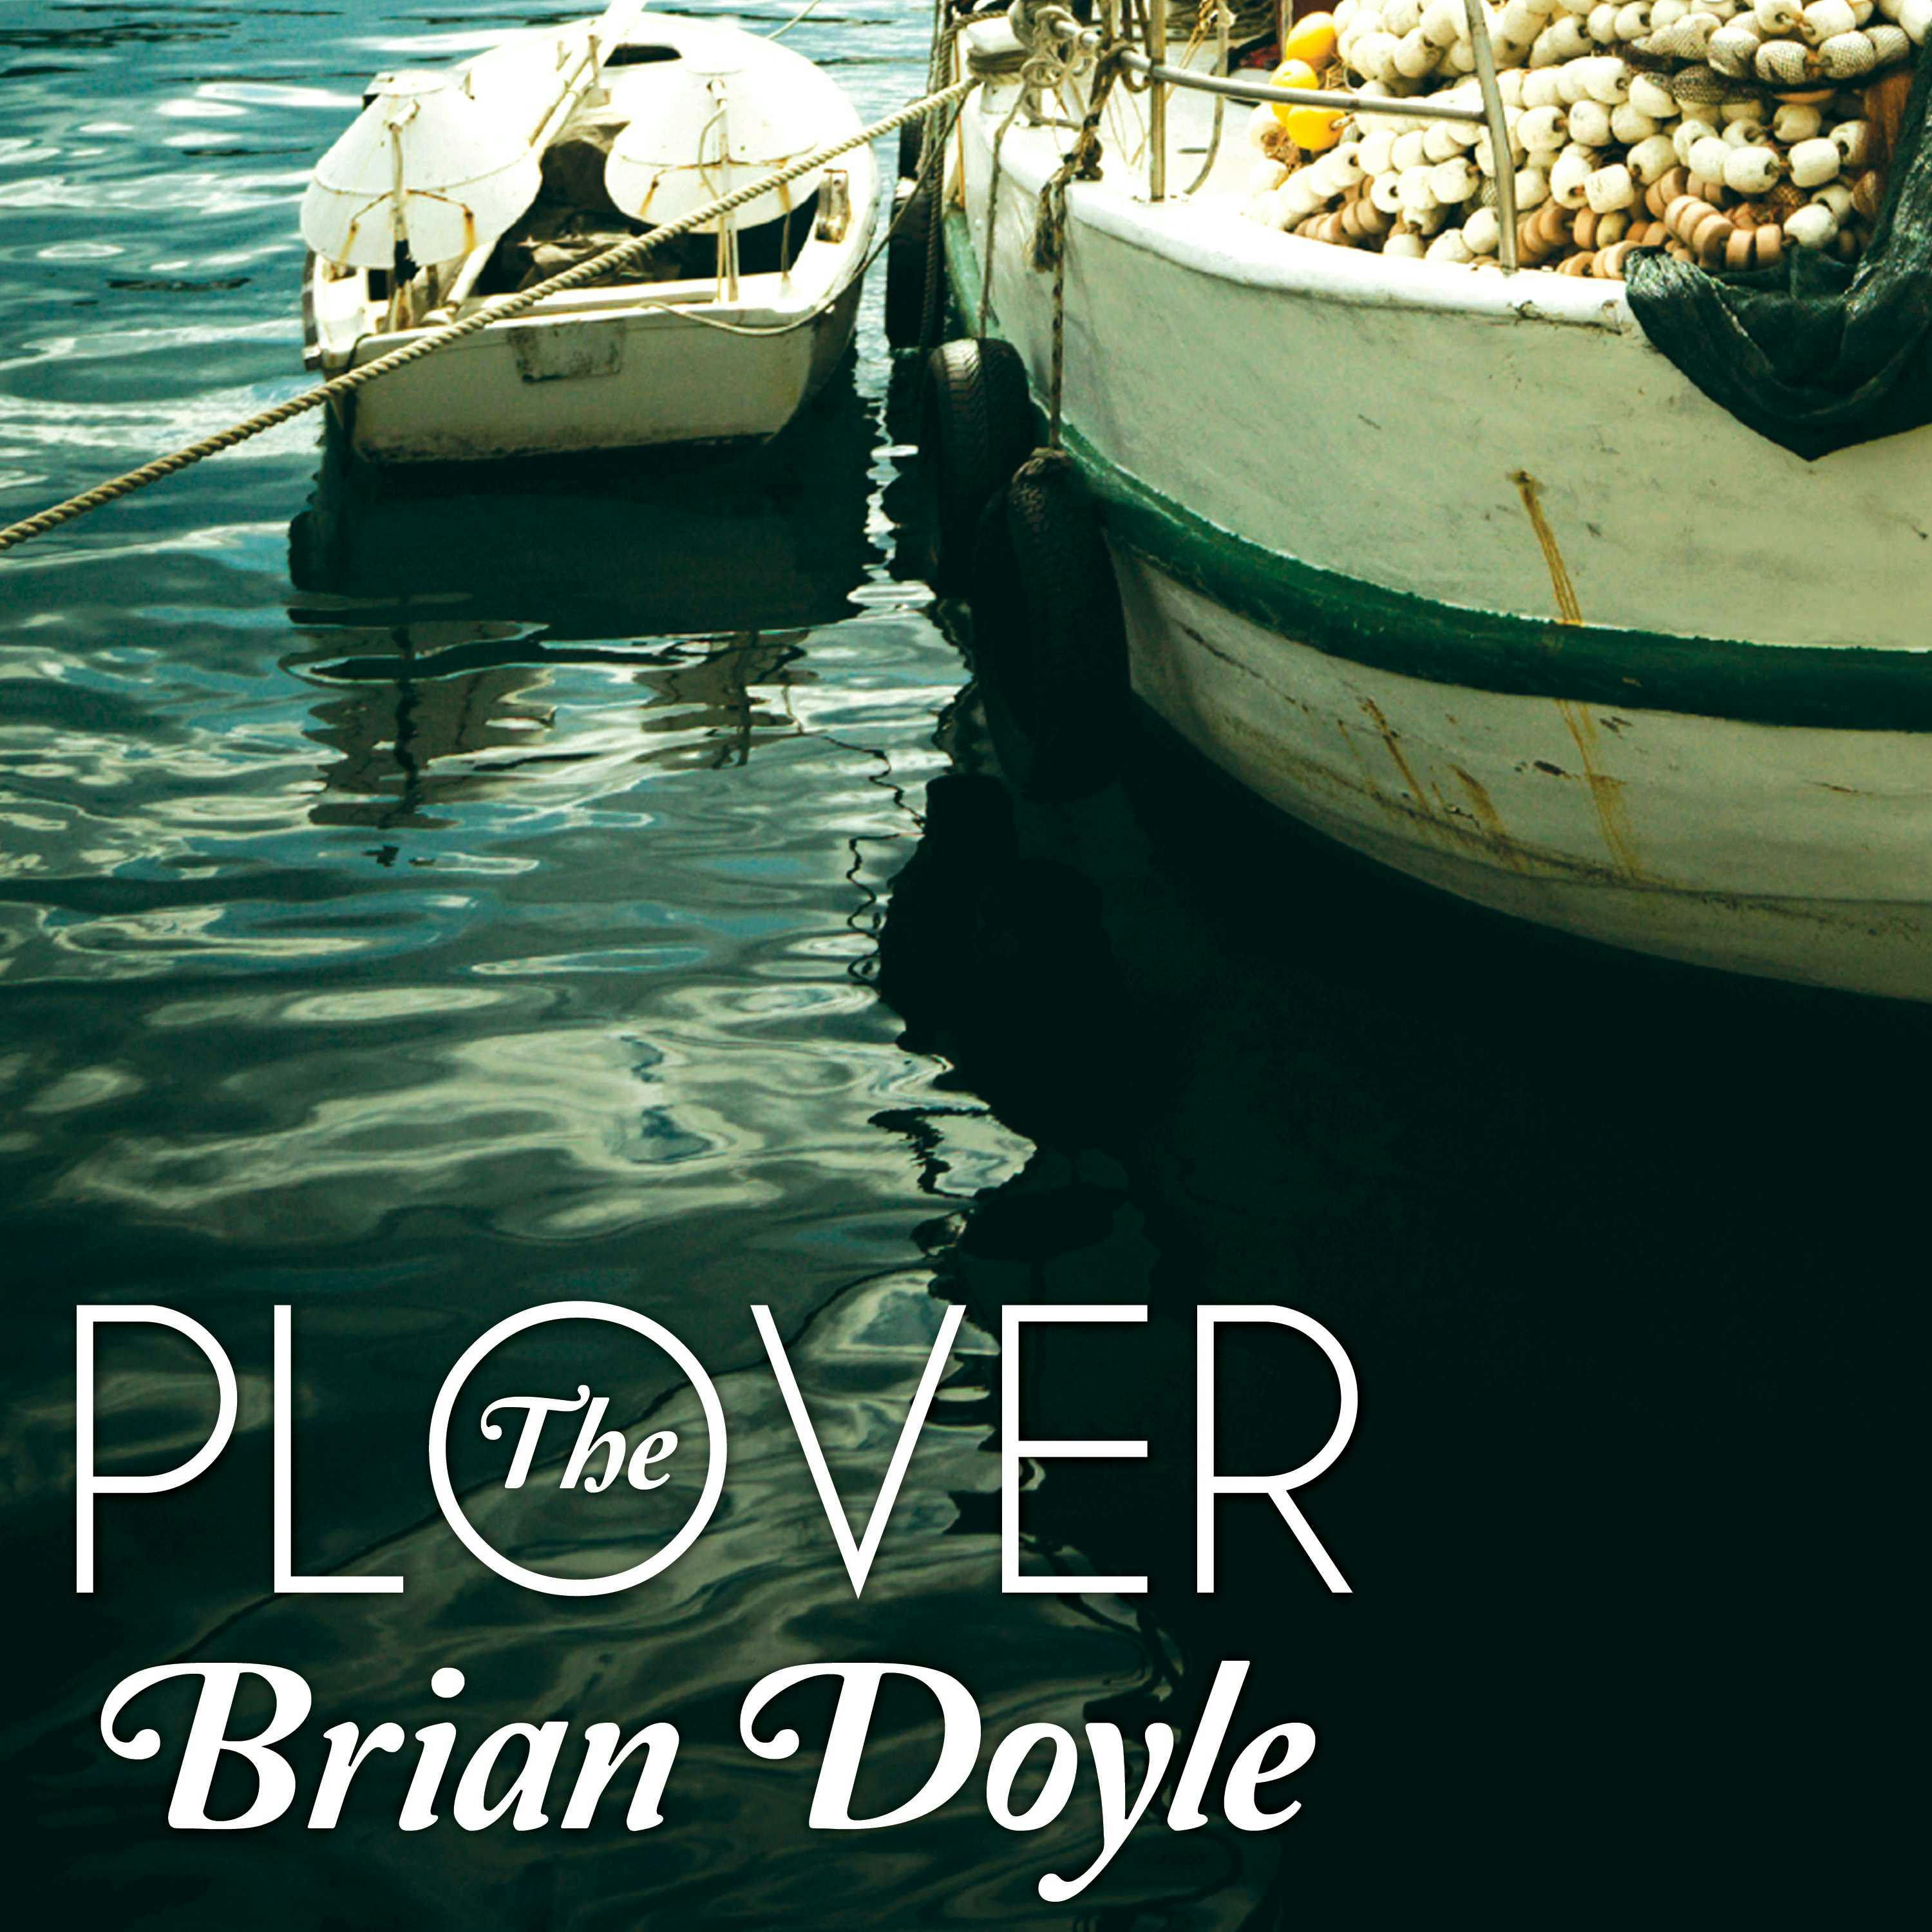 The Plover - Brian Doyle